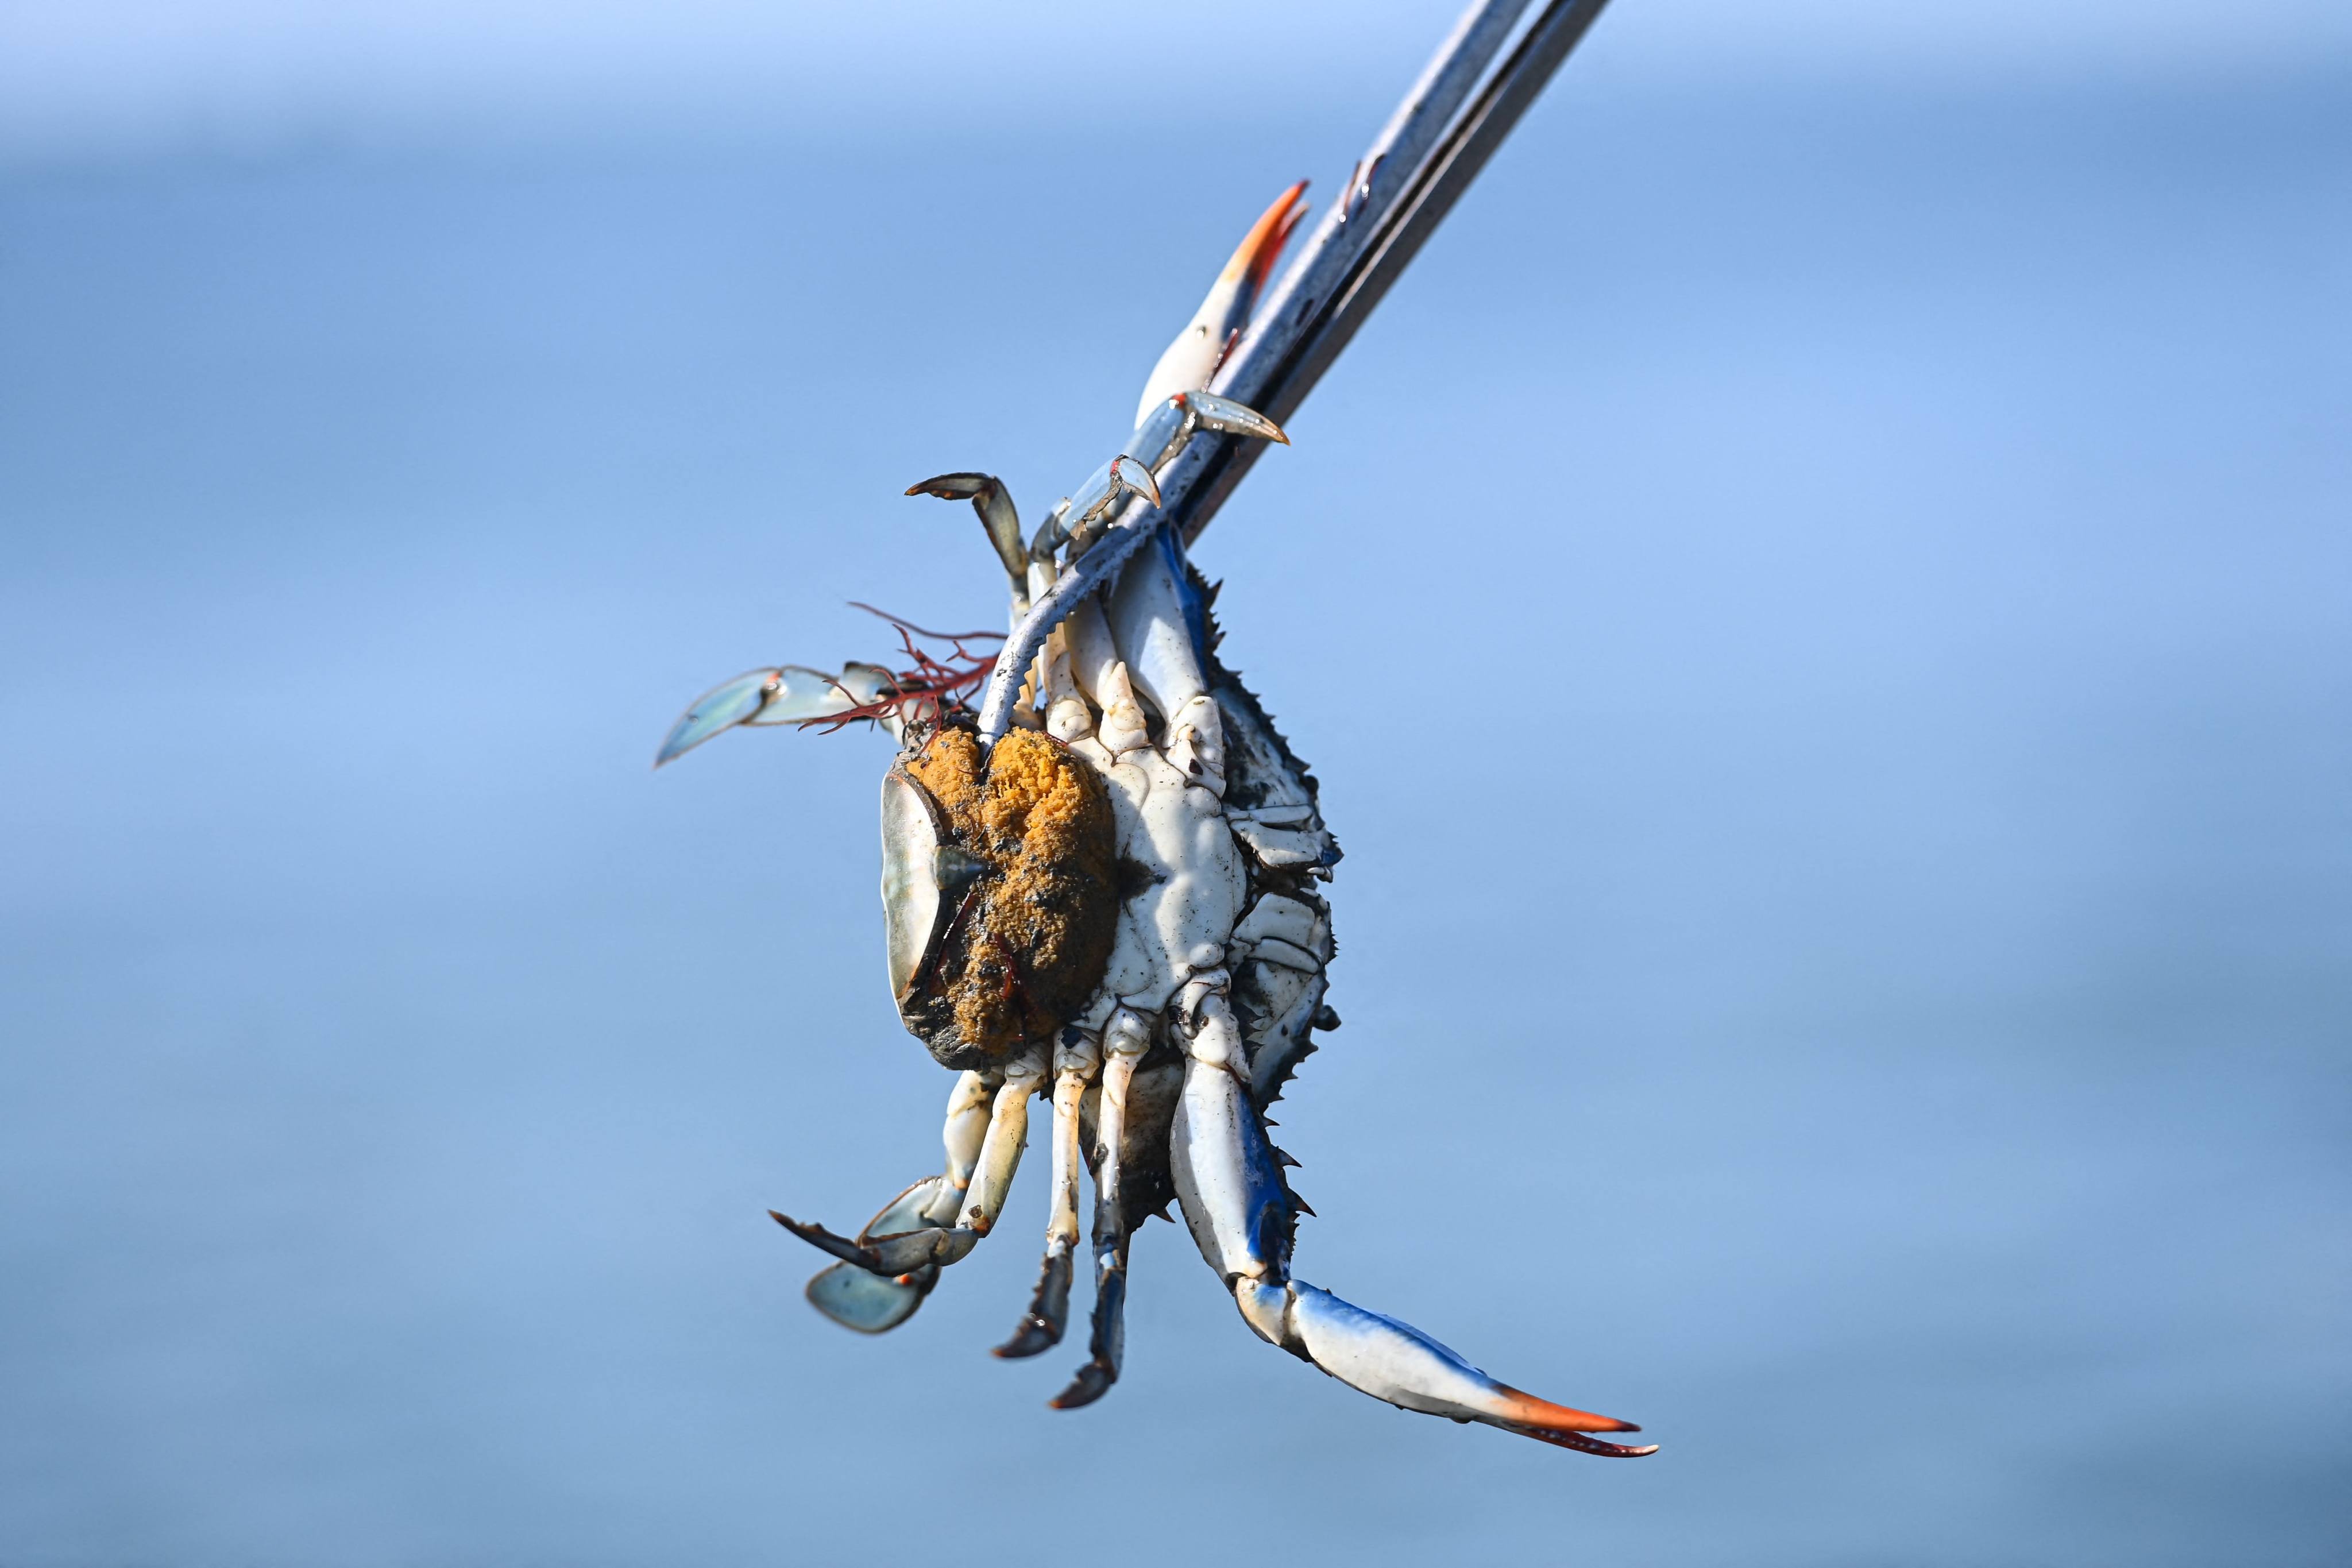 A female blue crab with eggs in the lagoon of Scardovari, south of Venice, Italy. The blue crab is a particularly aggressive species threatening local shellfish and fish in the delta where the River Po reaches the Adriatic Sea. Photo: AFP